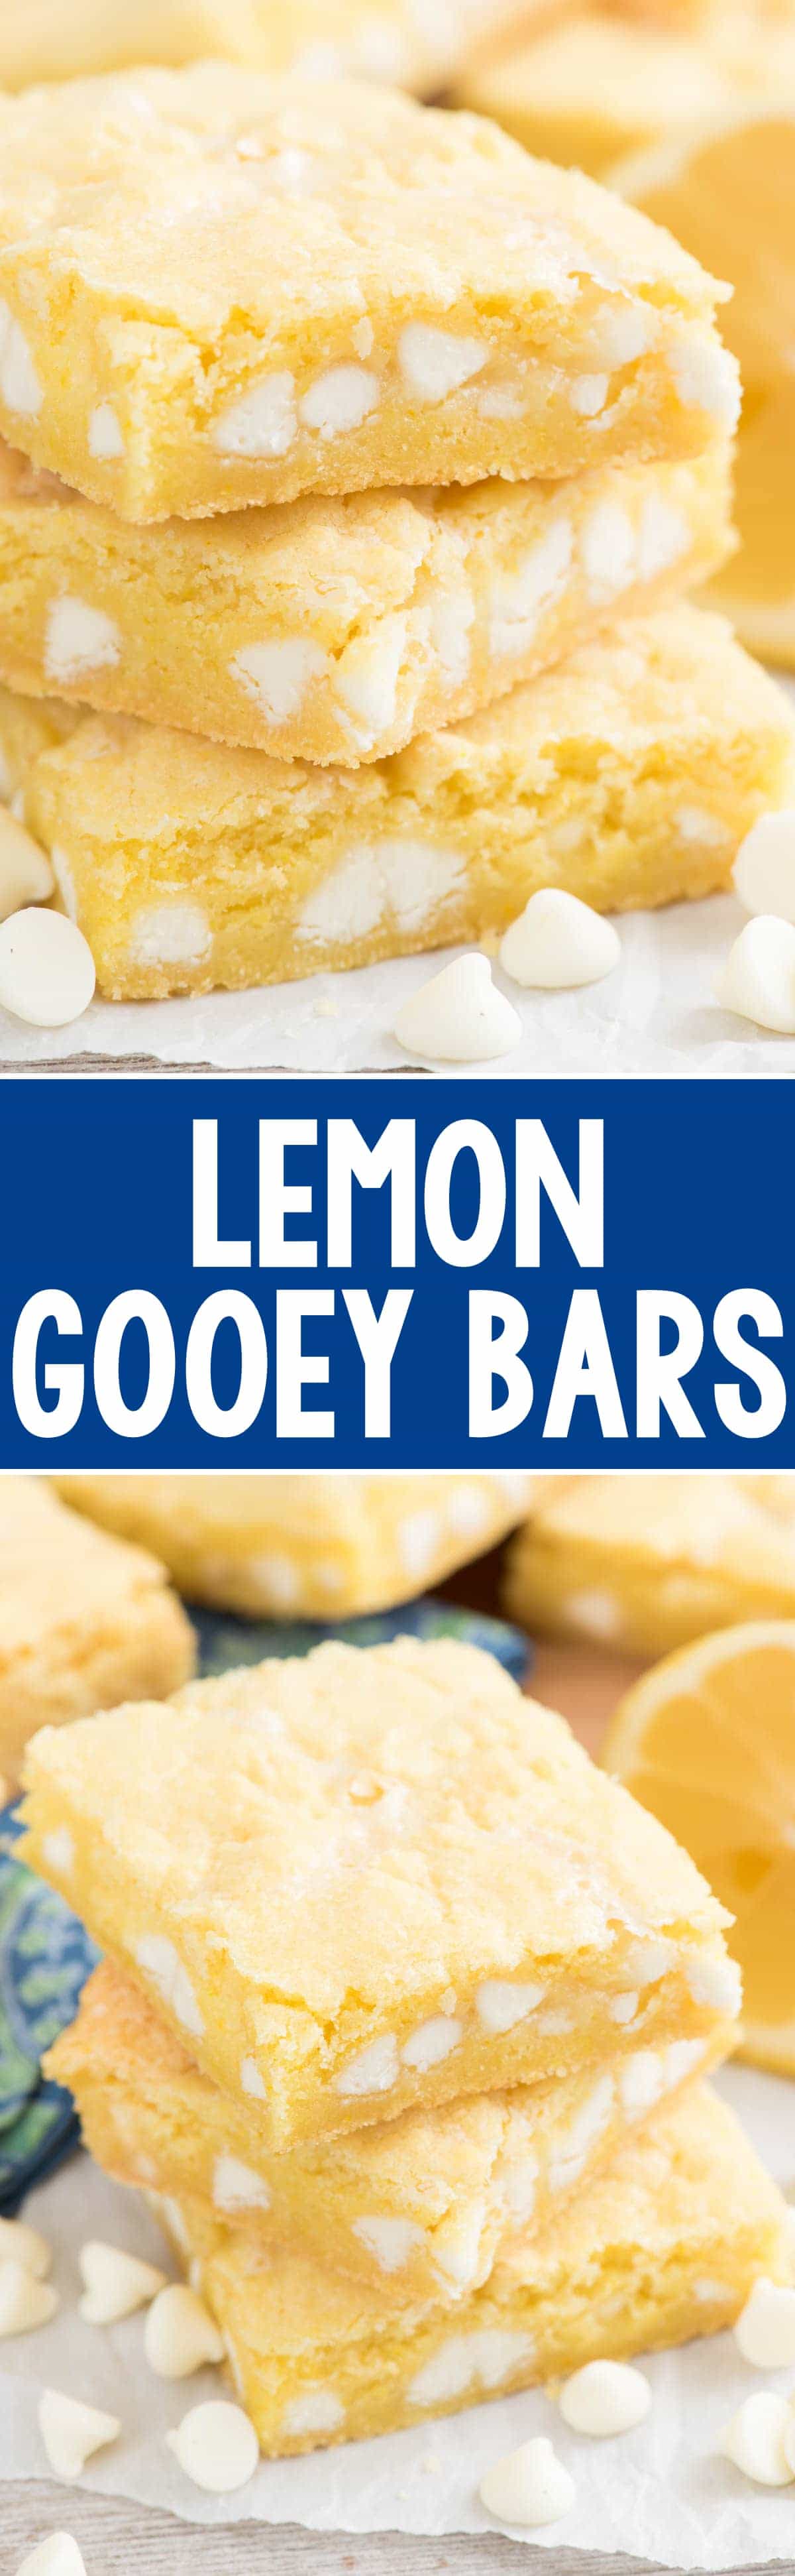 Pic collage of Lemon gooey bar stack on parchment paper with title